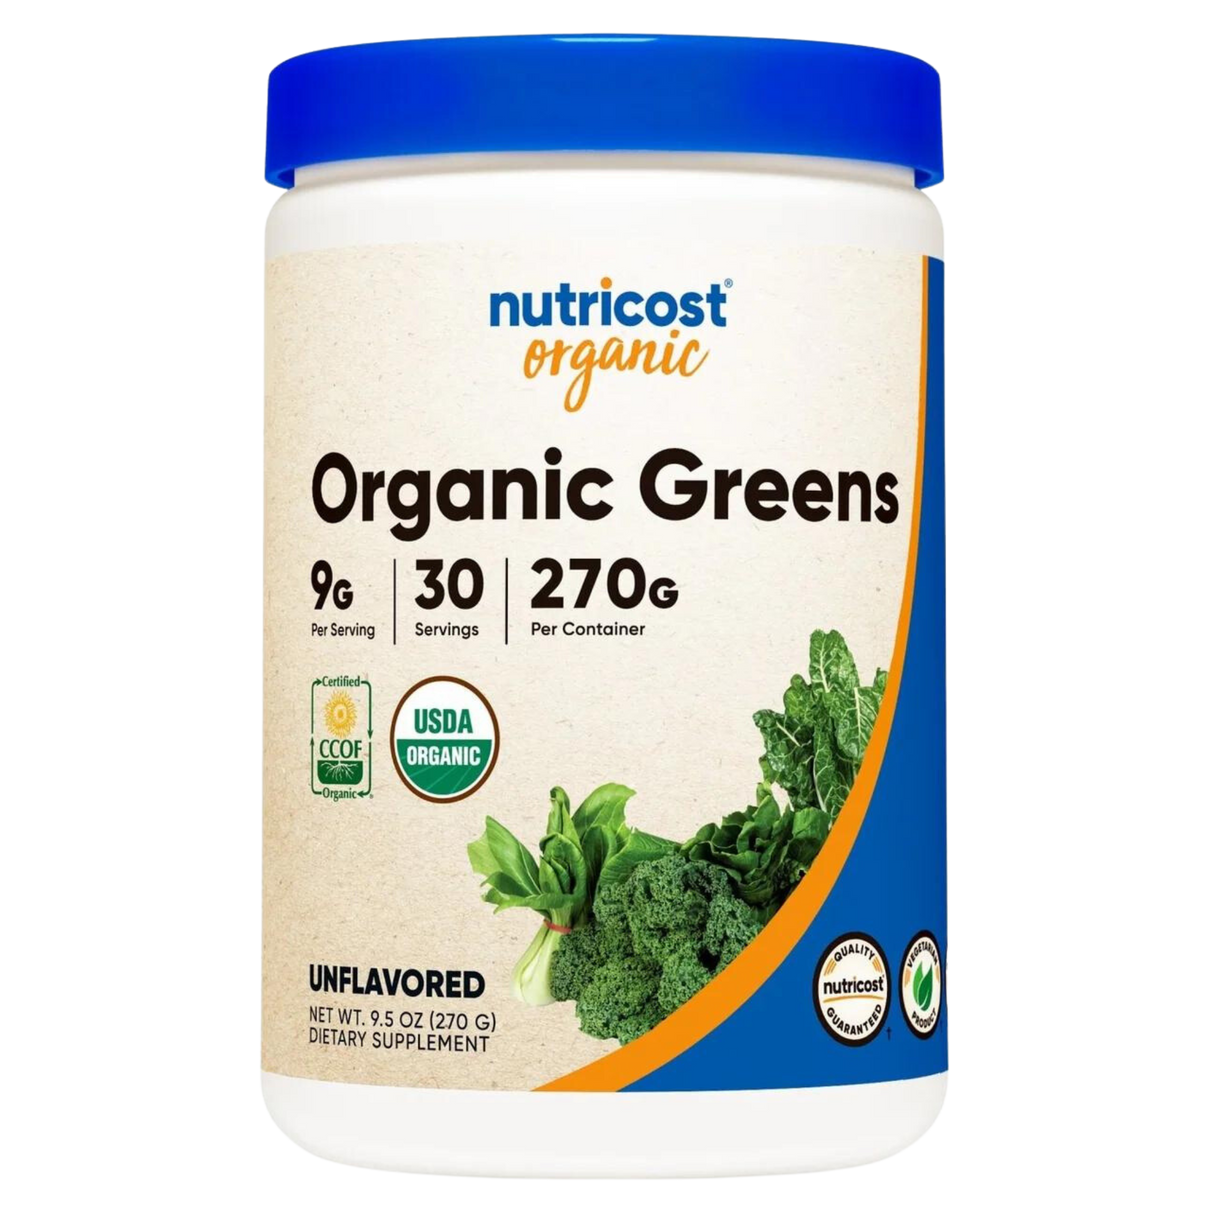 Nutricost Organic Greens - Kingpin Supplements 